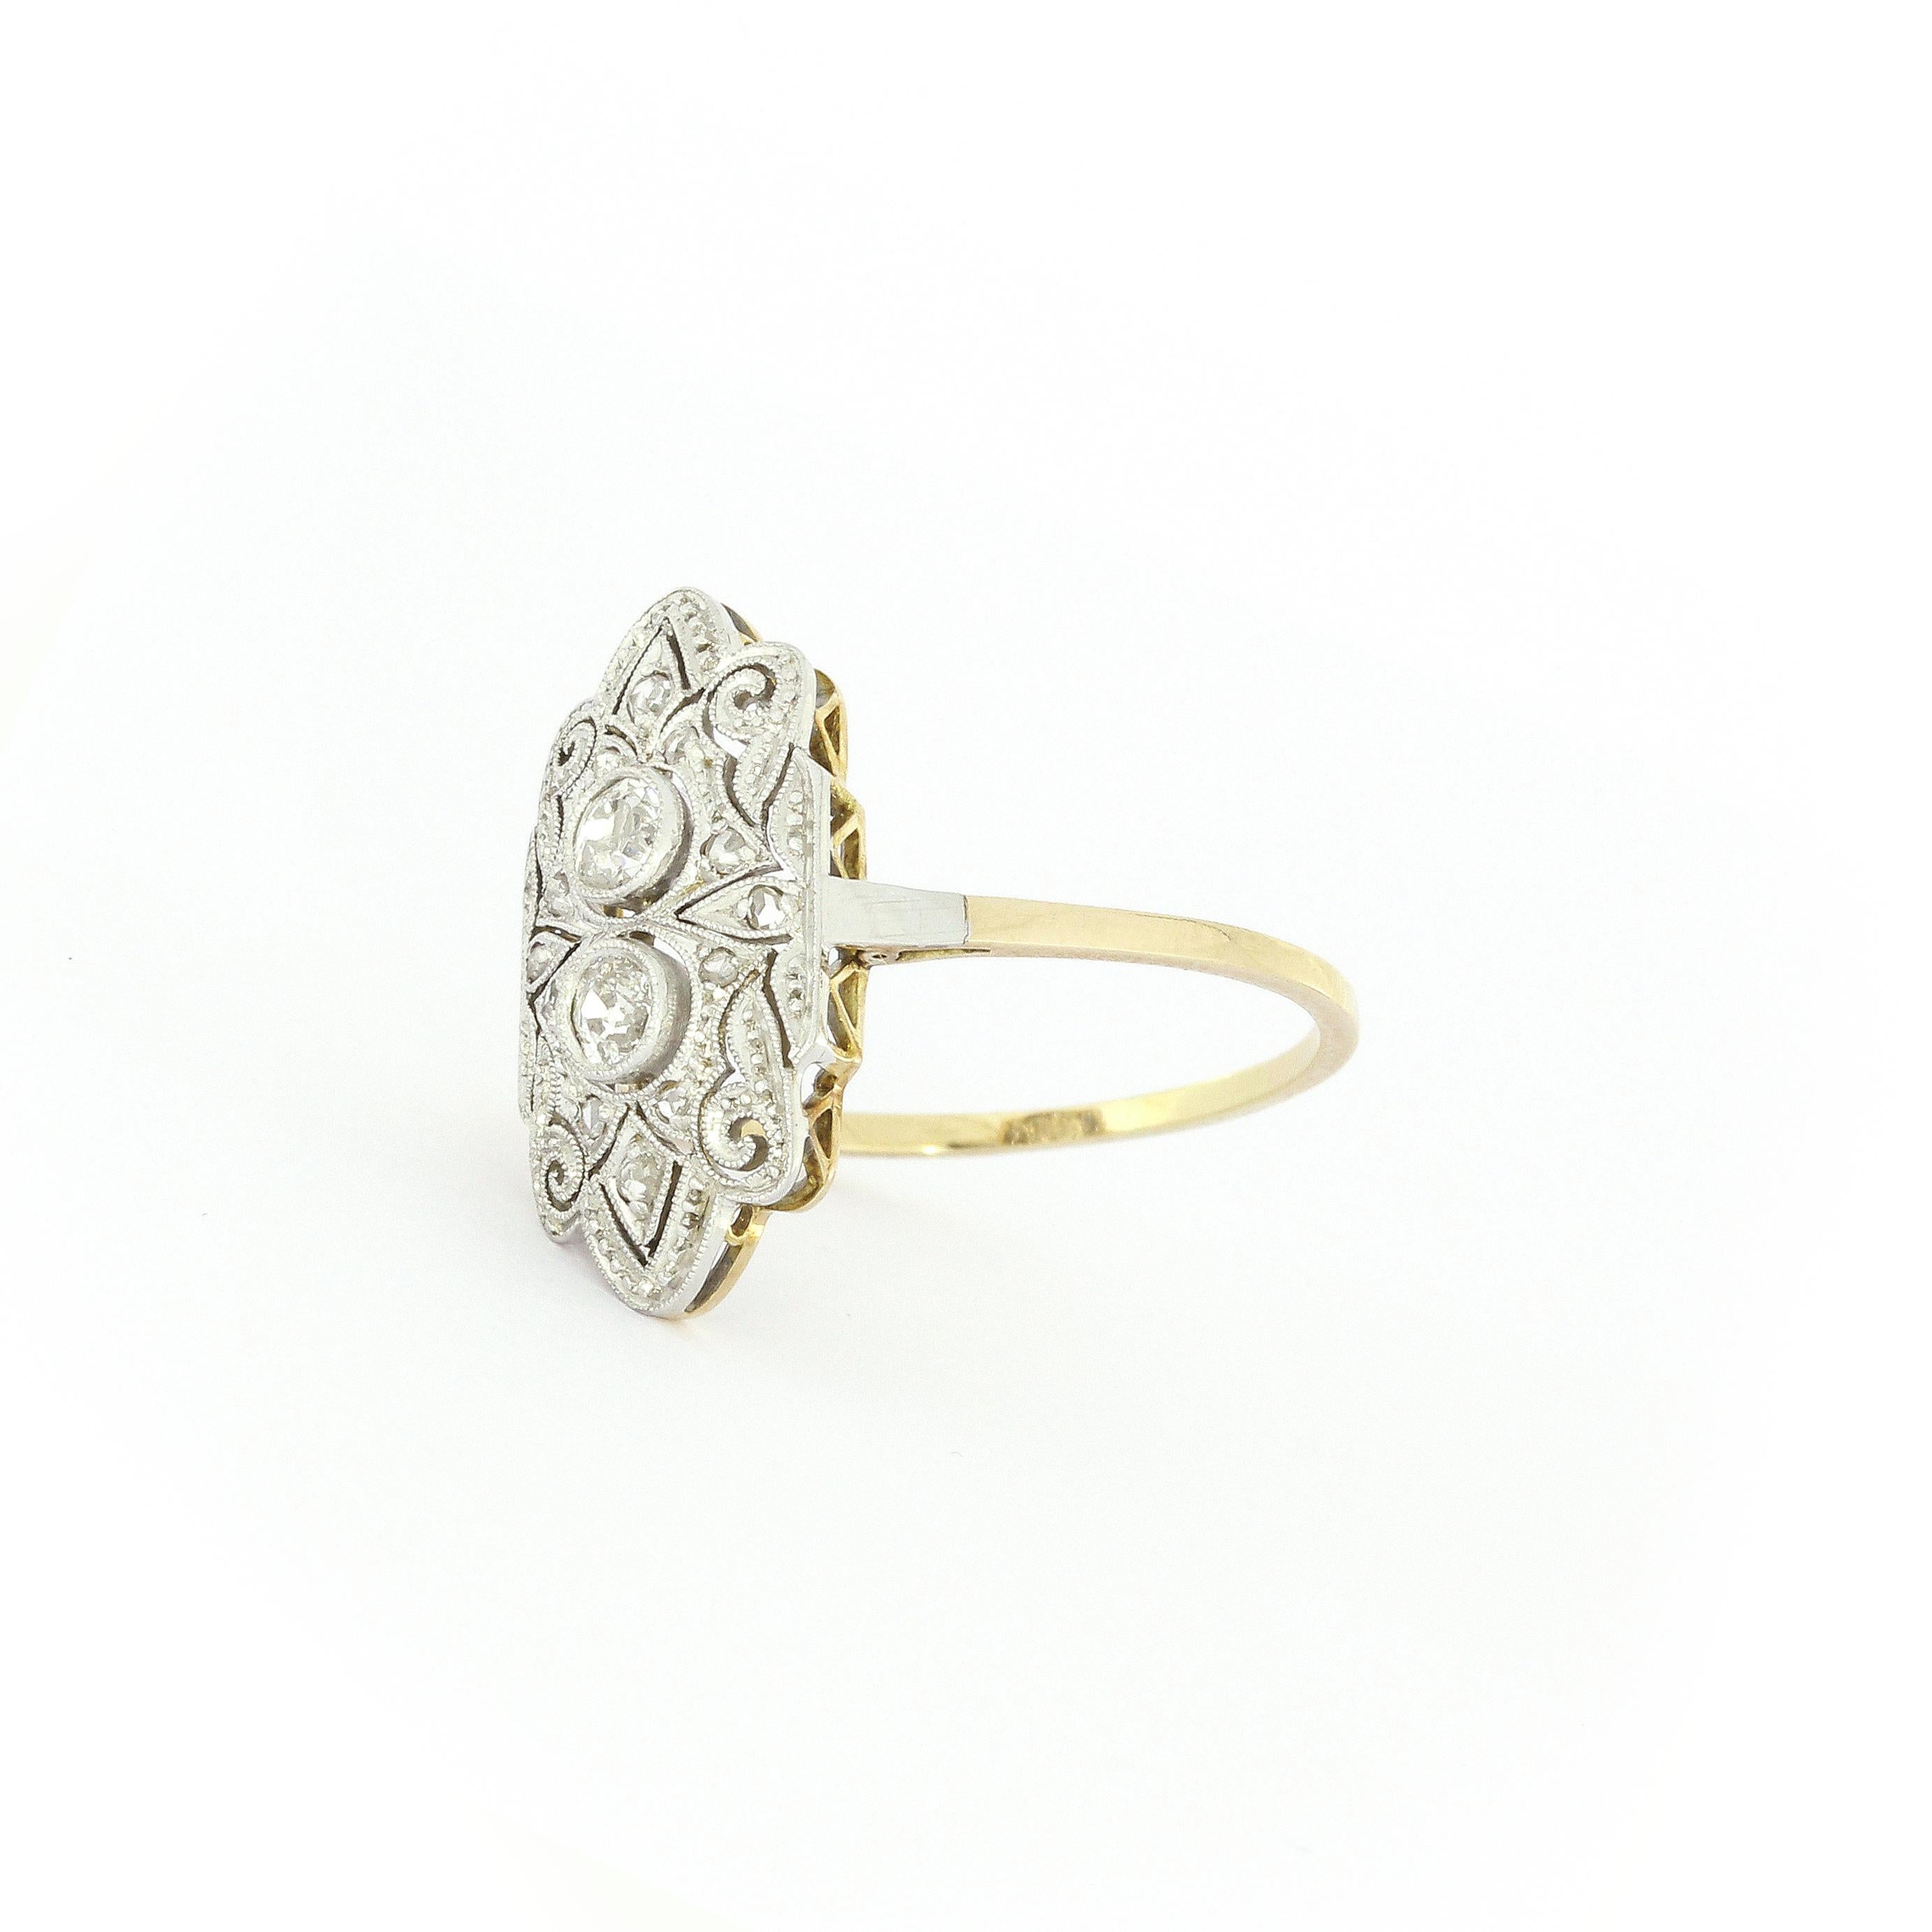 Art Deco Ring with 14 Old European Cut Diamonds approx. 0.42 Carat in White and Yellow Gold

Measurements
L: 19mm
W: 10mm
H: 11mm